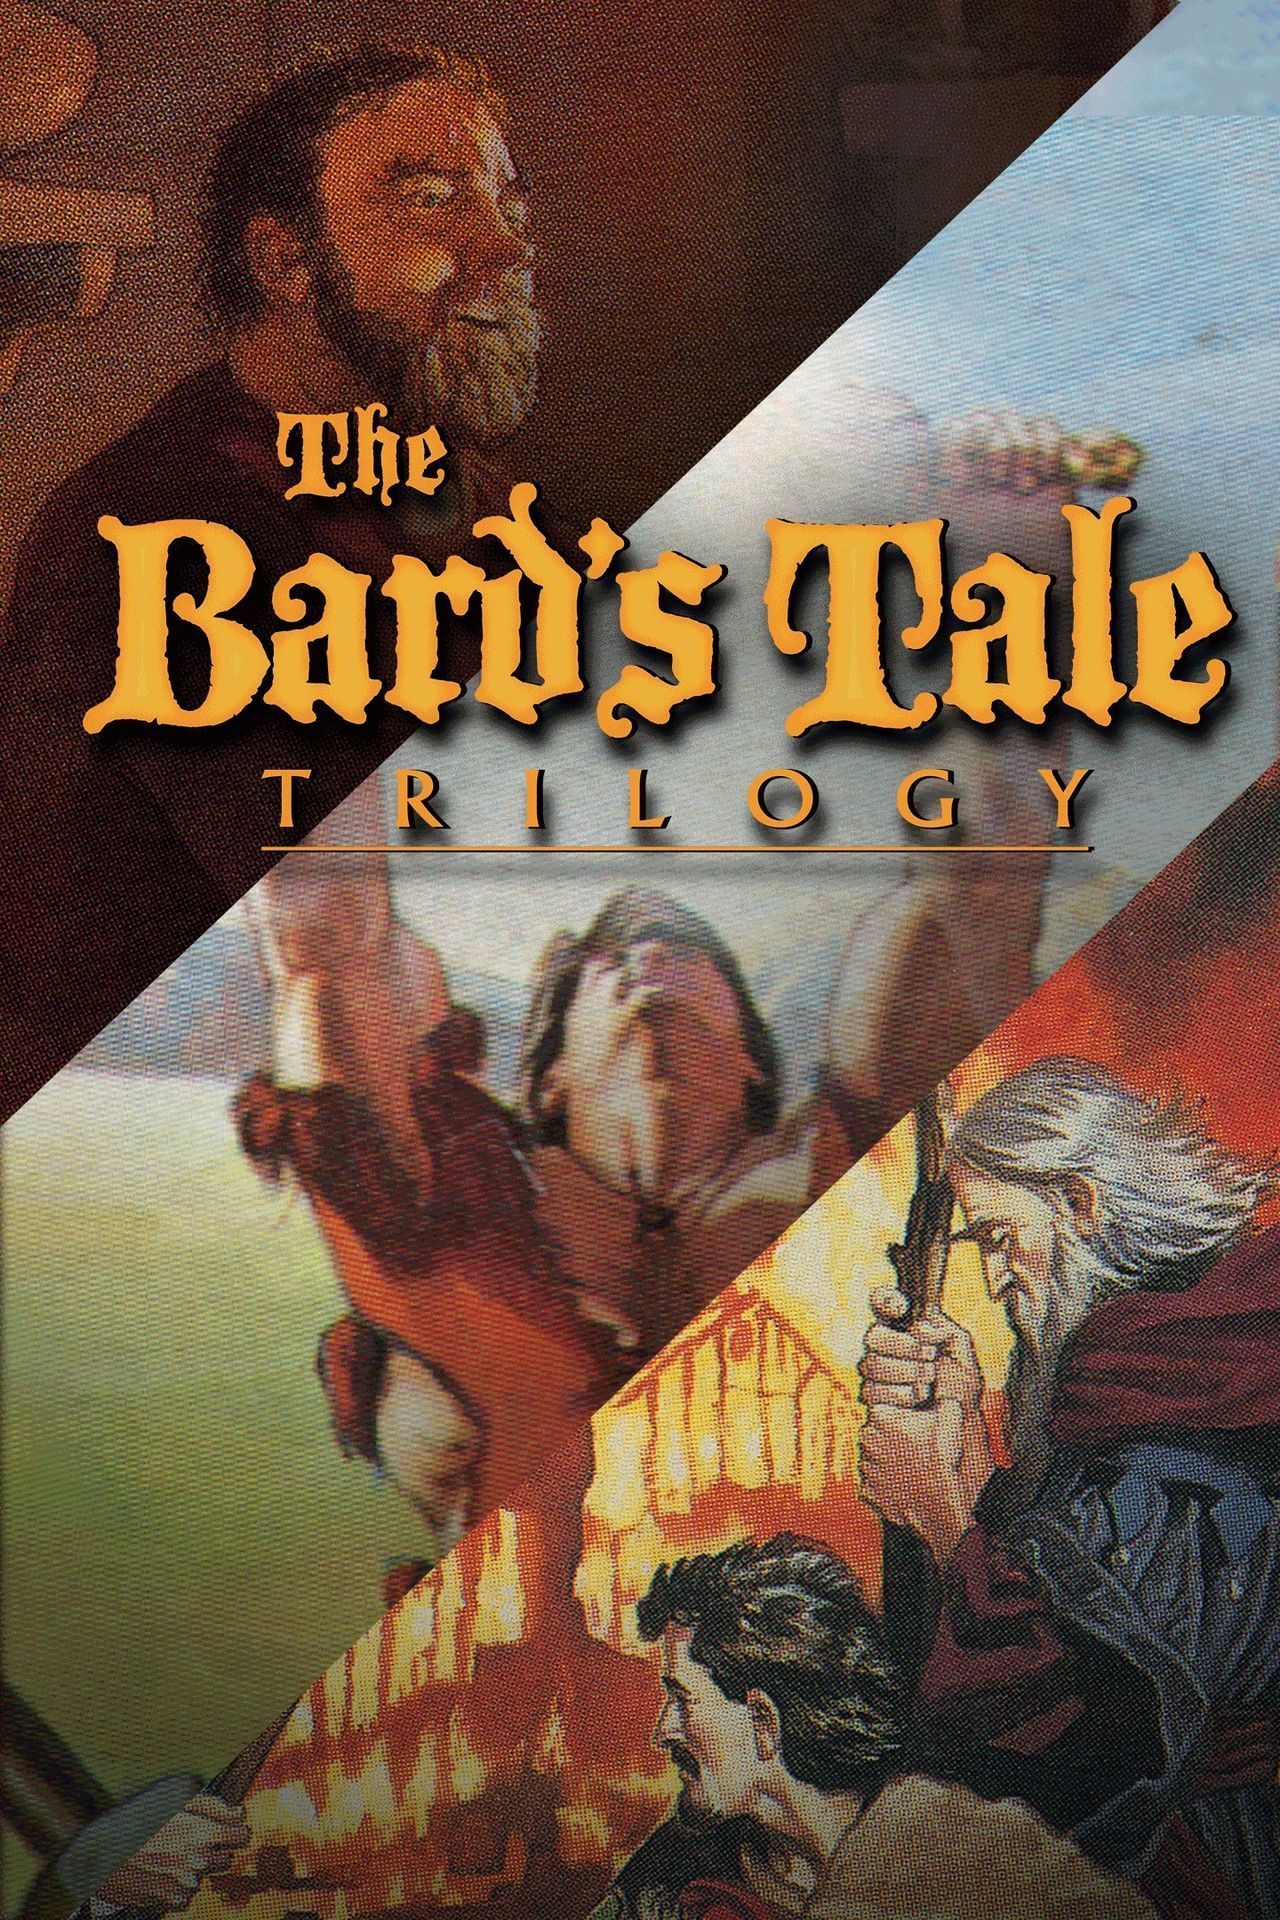 favorite playstyle the bards tale